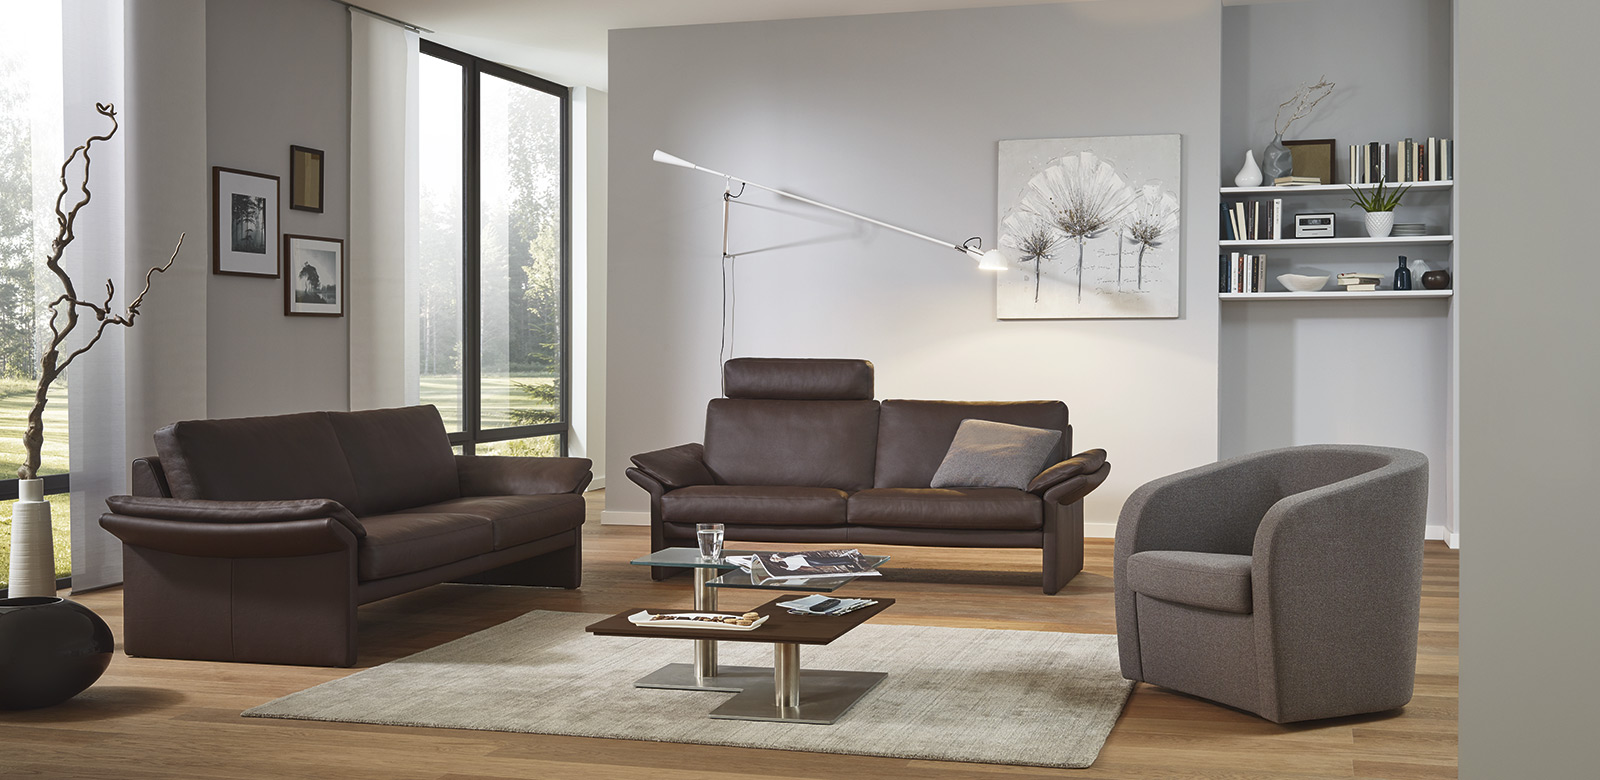 Two CL910 sofas in brown leather and armchairs in grey fabric in a modern living room and terrace facing the large property.